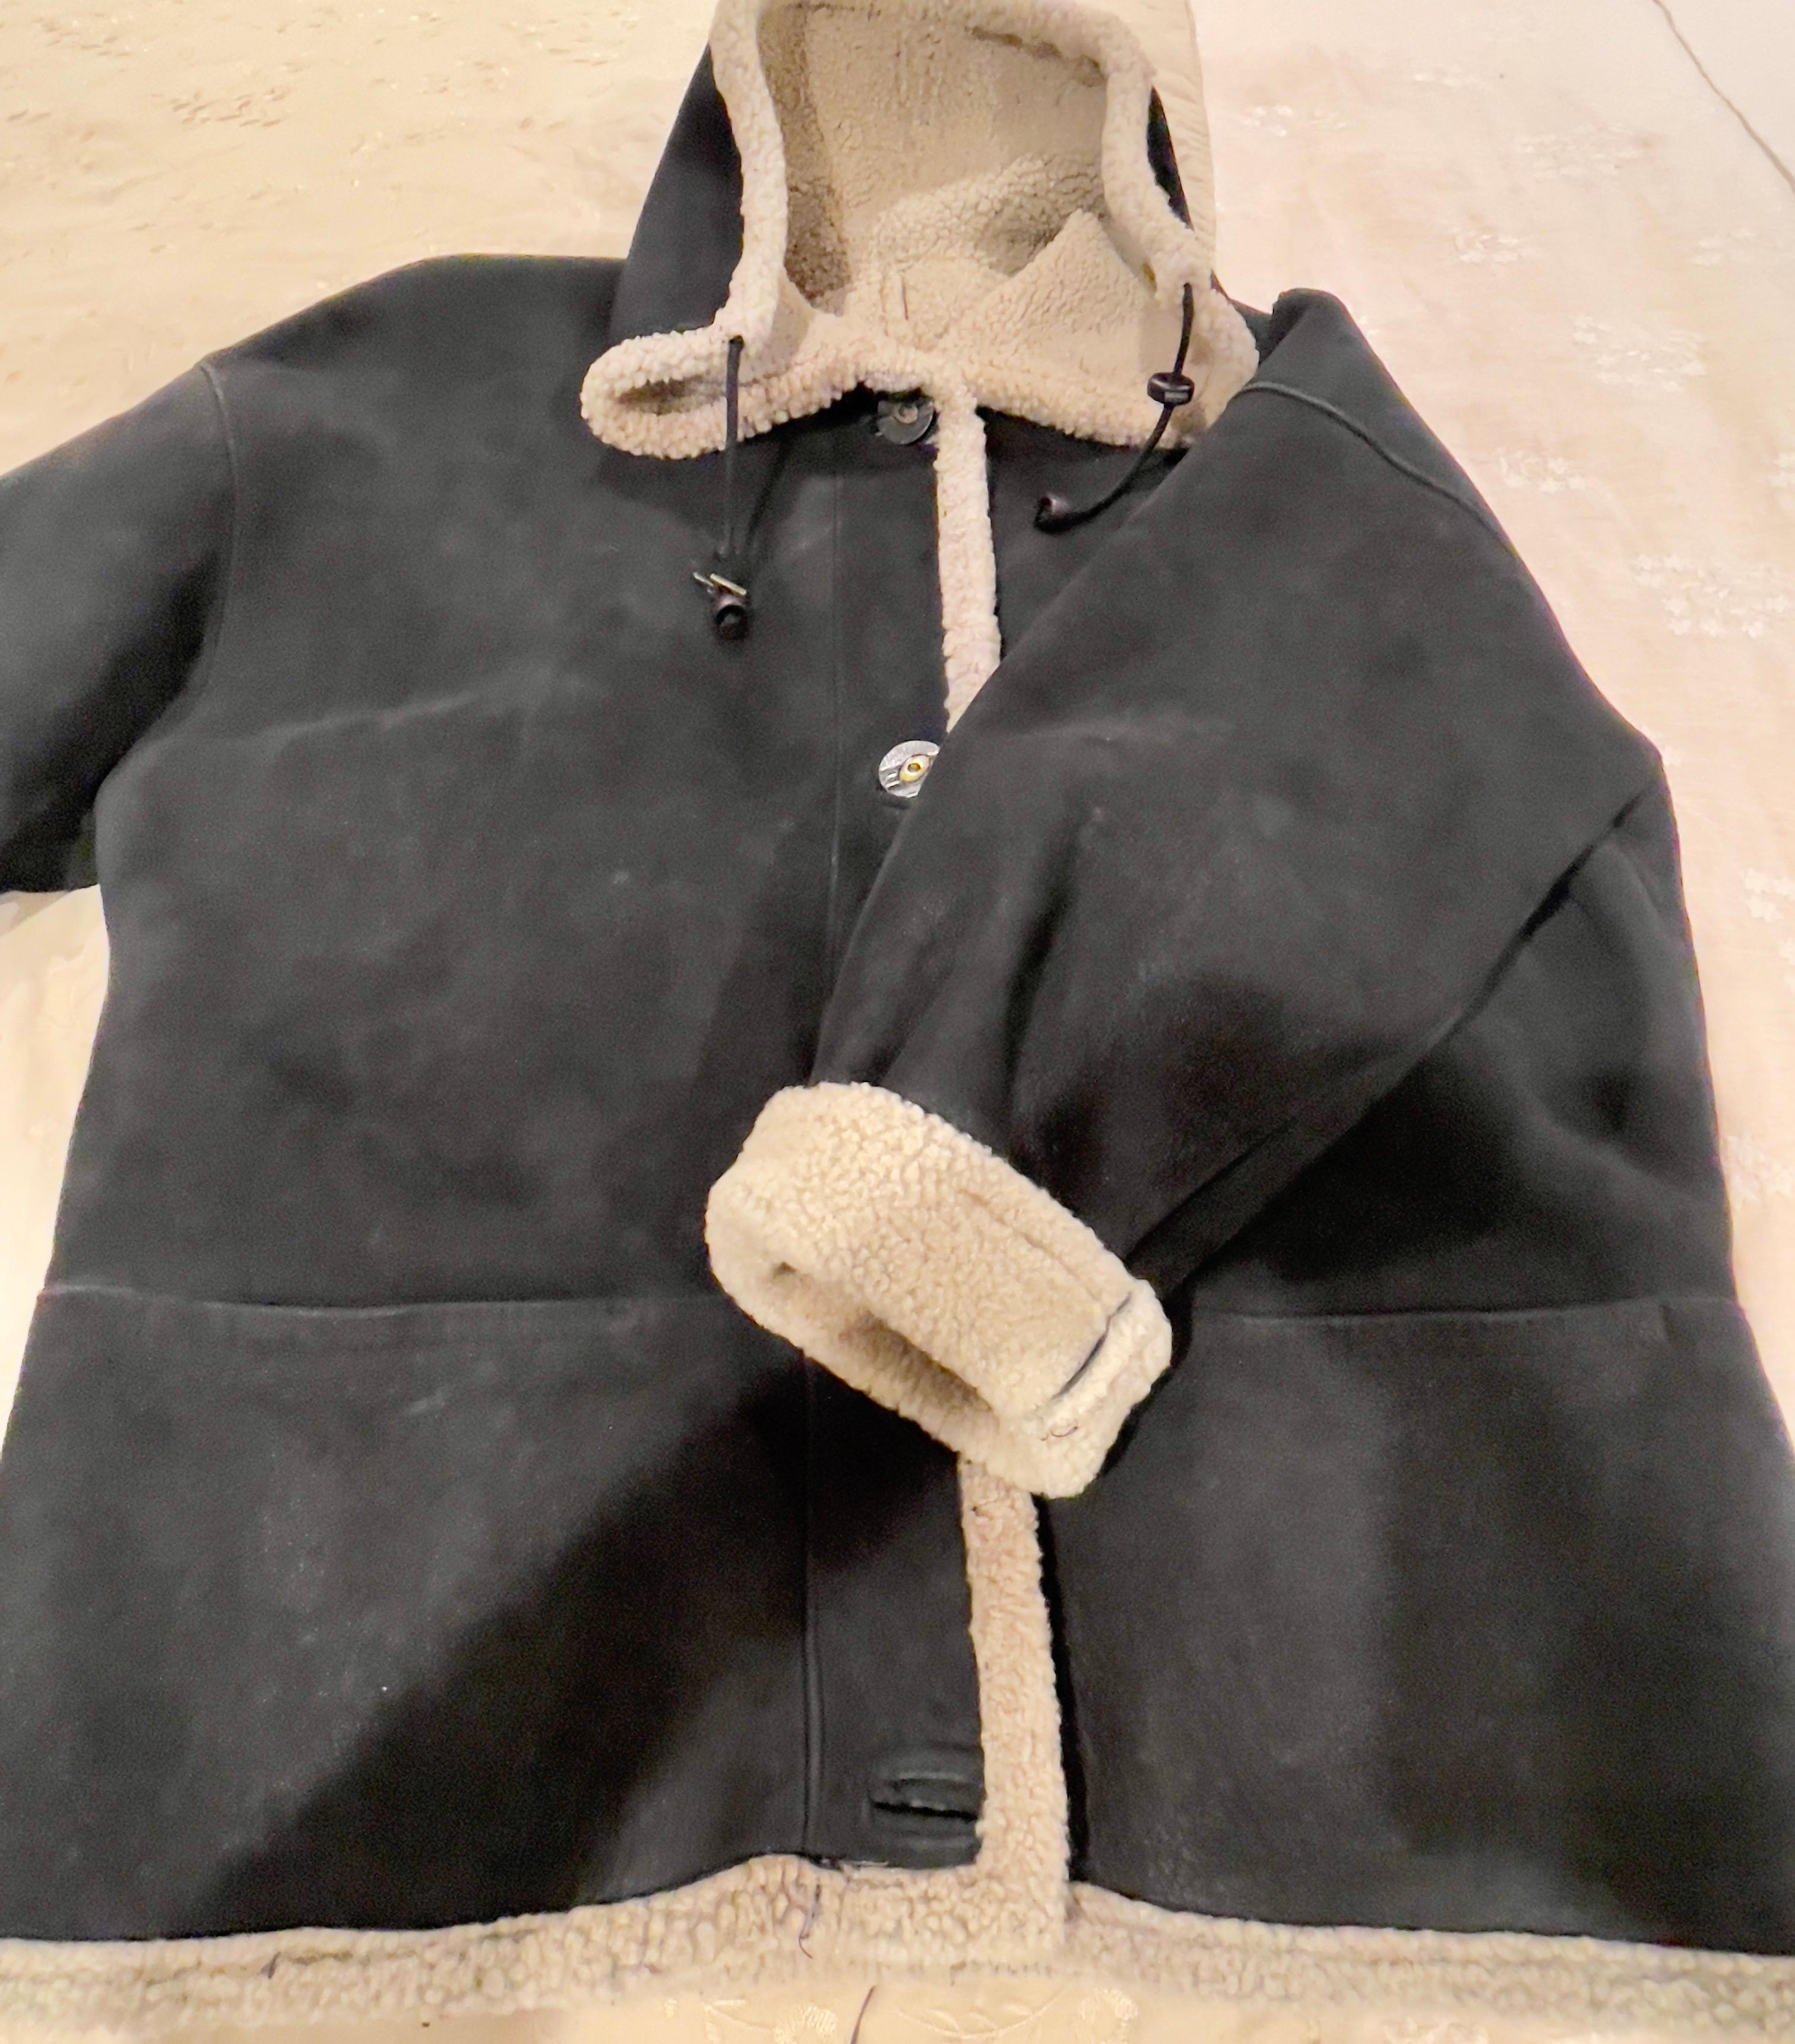  Winter ·  Maximilian  AltaModa Genuine Fur · Genuine Leather · Shearling · Casual · Bomber
Super-insulating extra fine quality 
almost new ! super excellent condition
I purchased for myself from Bloomingdale's White Plains in NY
I am 5'2 and